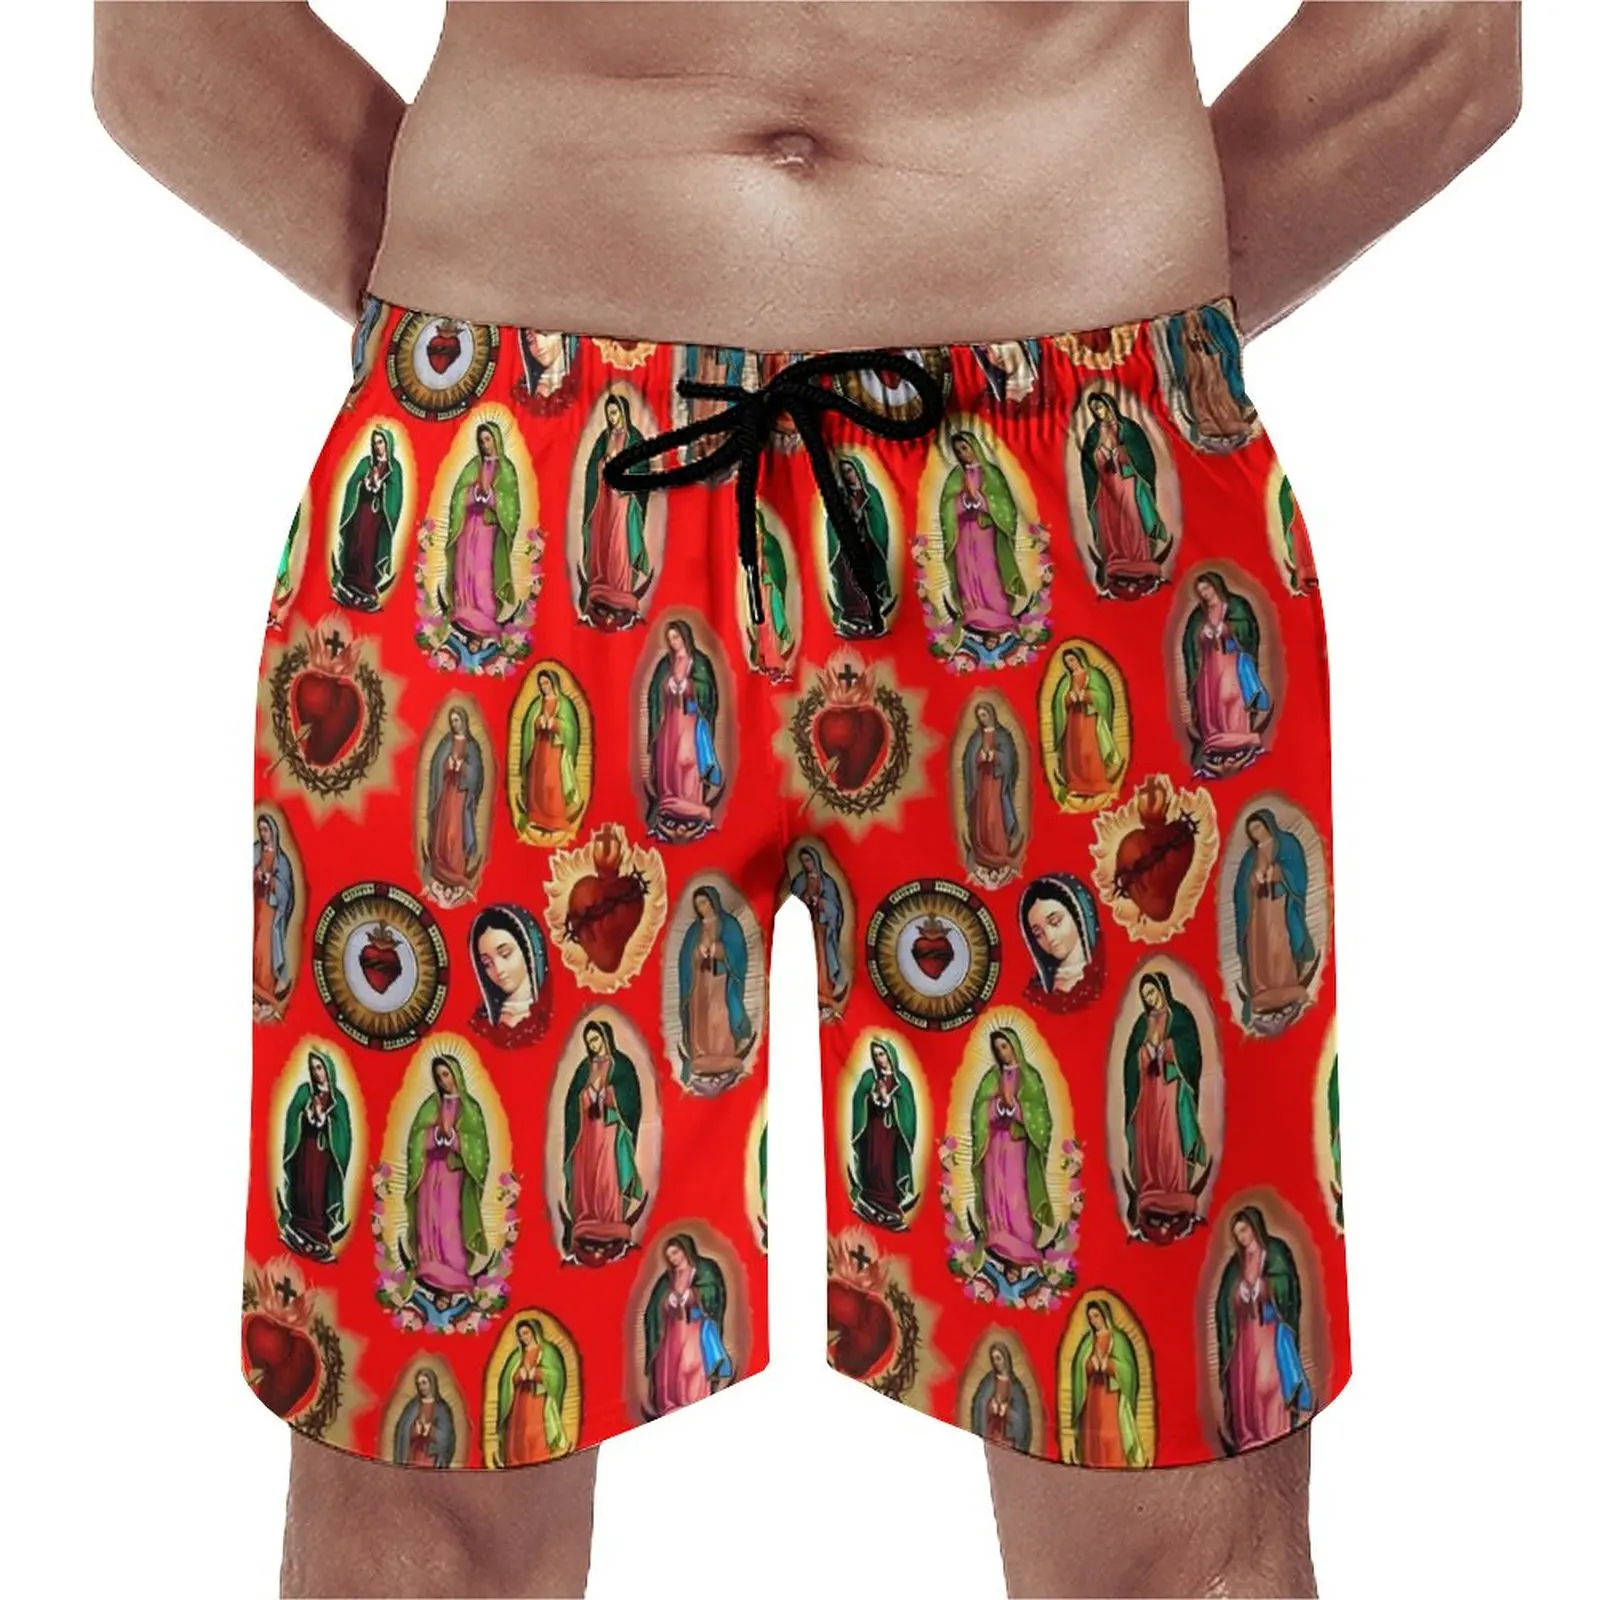 

Summer Board Shorts Virgin Mary Surfing Our Lady of Guadalupe Design Board Short Pants Classic Fast Dry Beach Trunks Plus Size